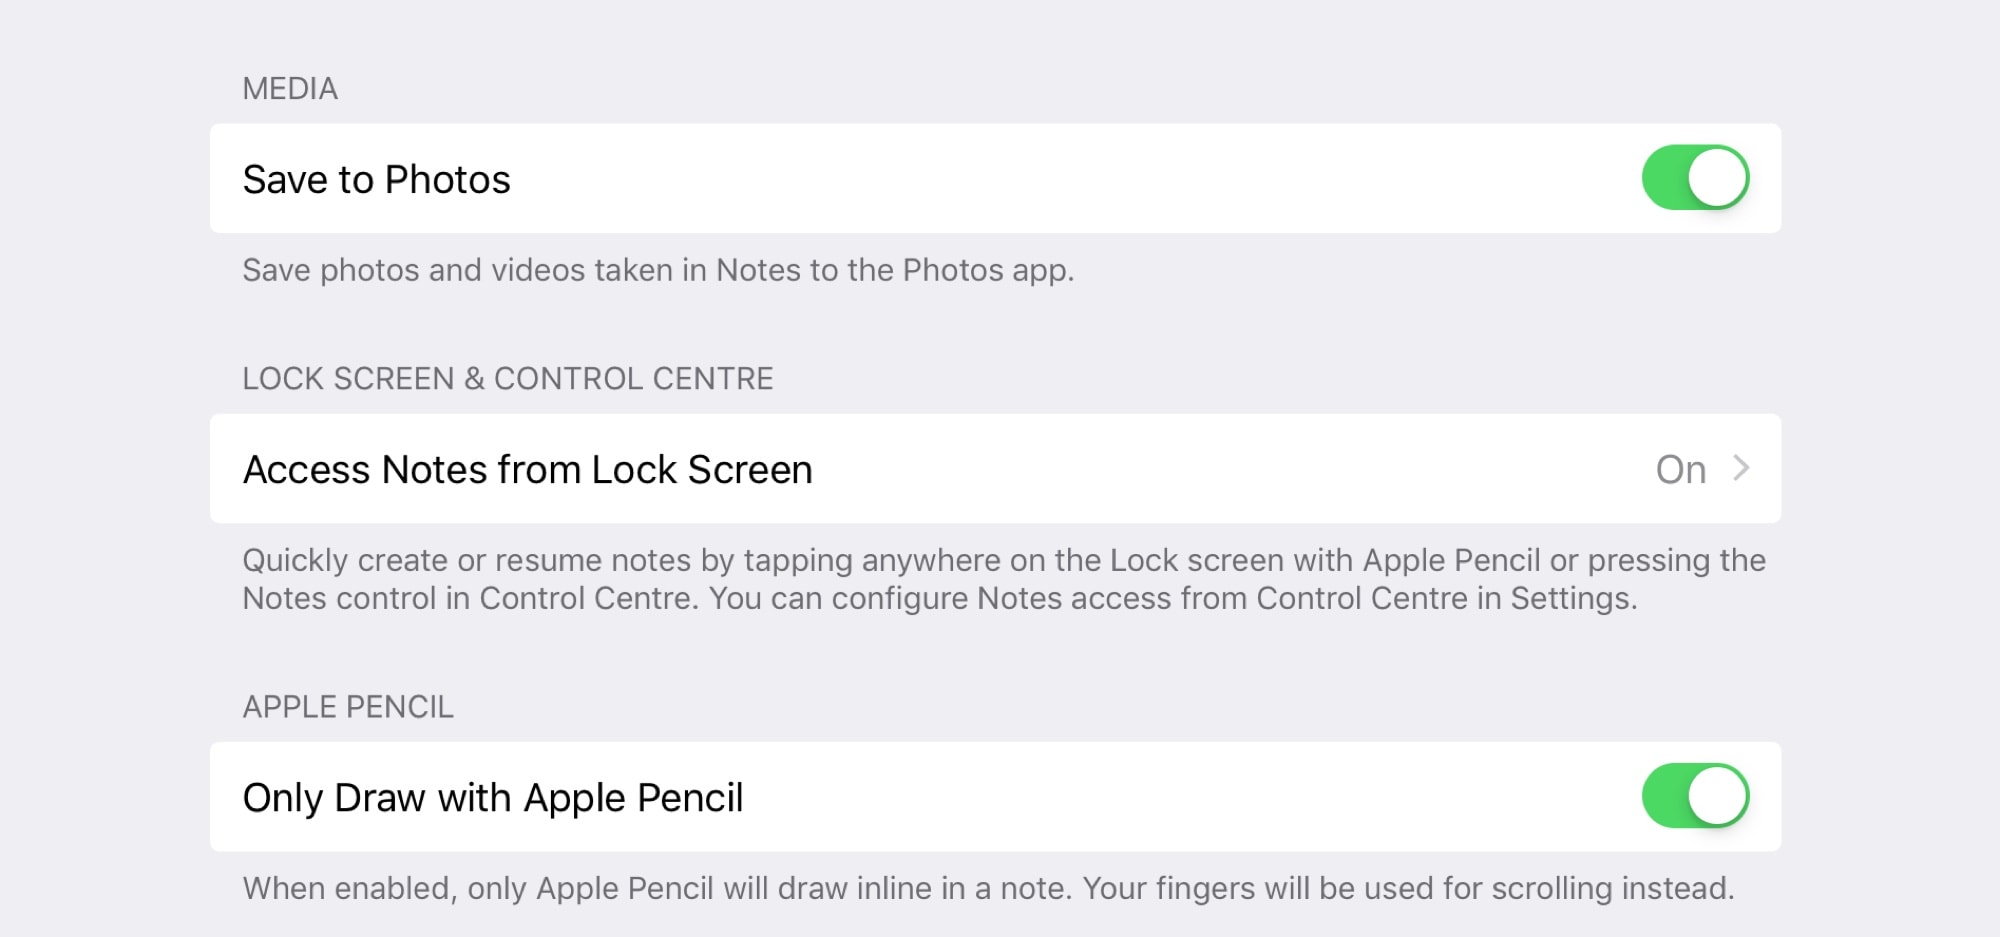 These are the Apple Pencil settings for the Notes app.